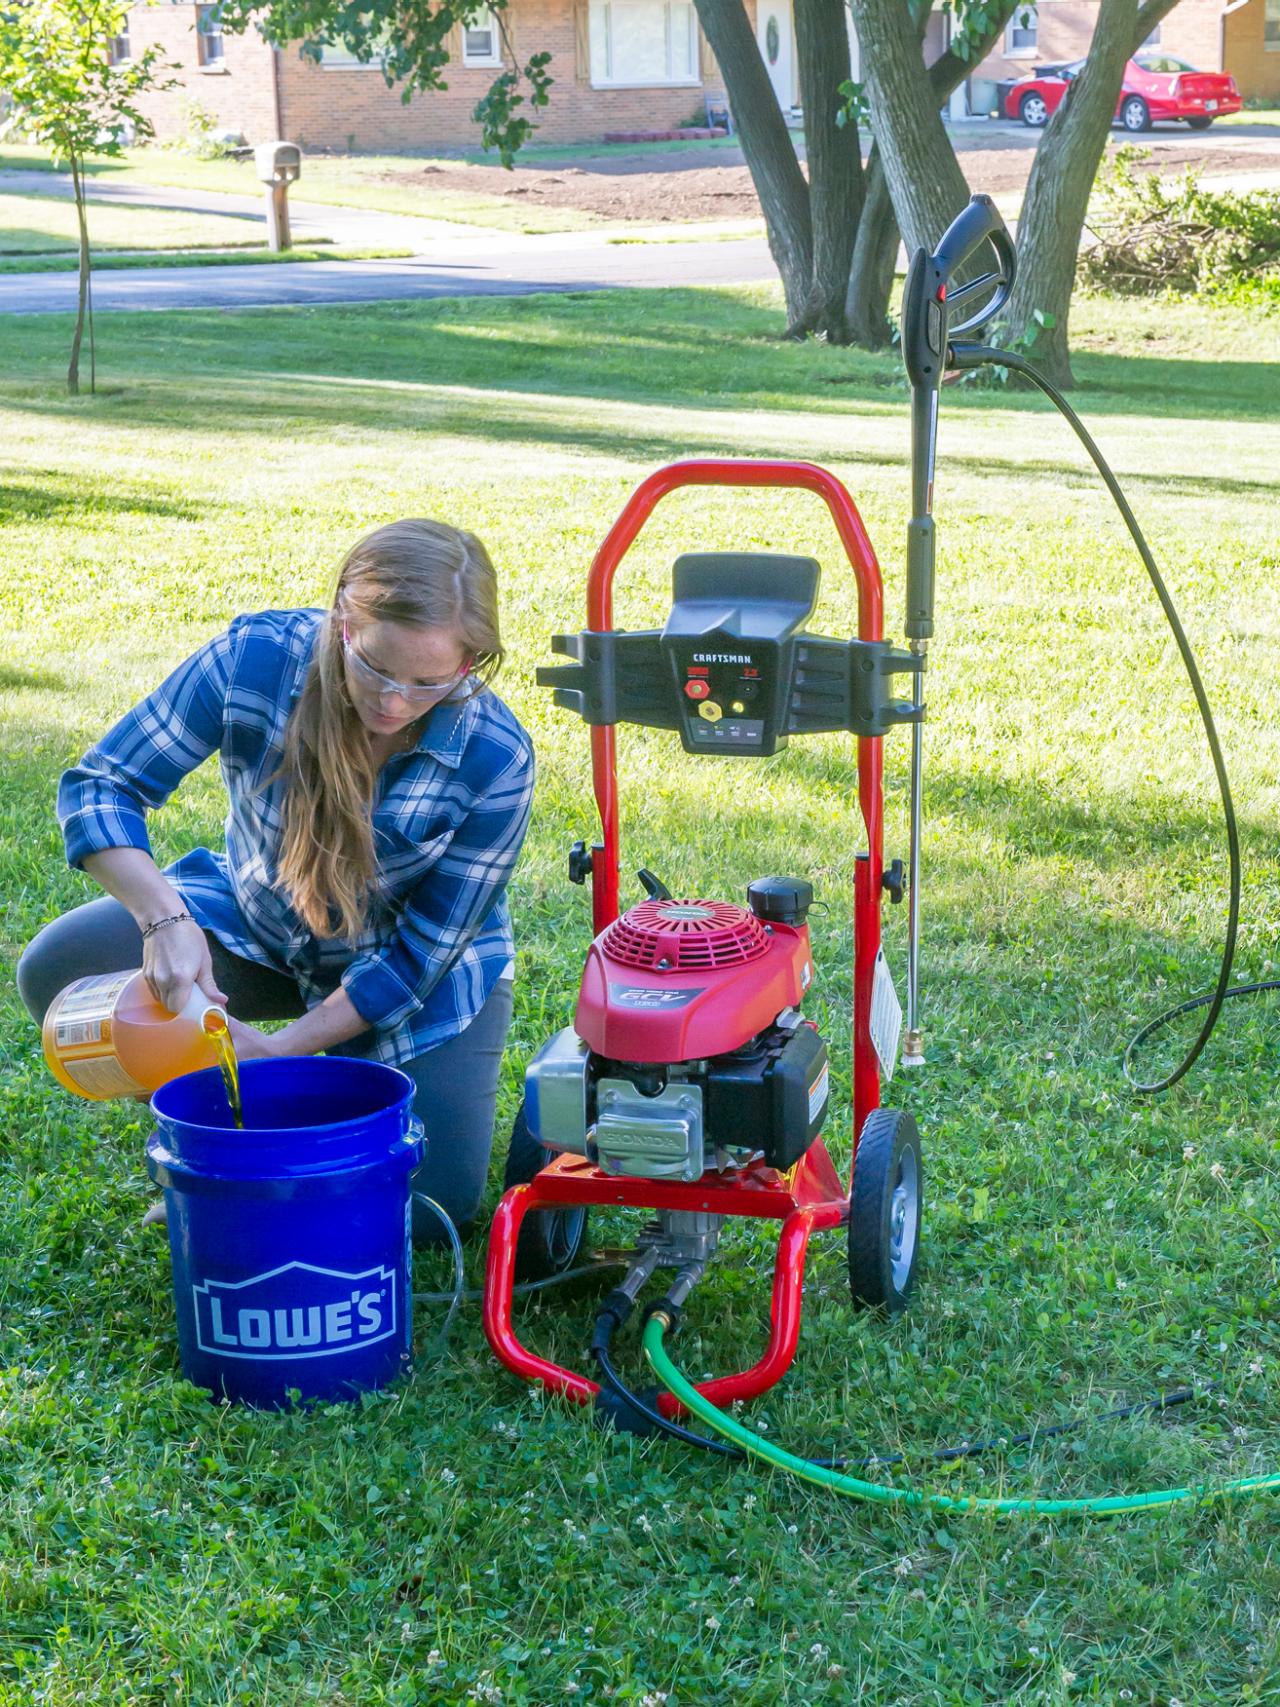 You D Be Surprised What You Can Clean With A Pressure Washer Diy